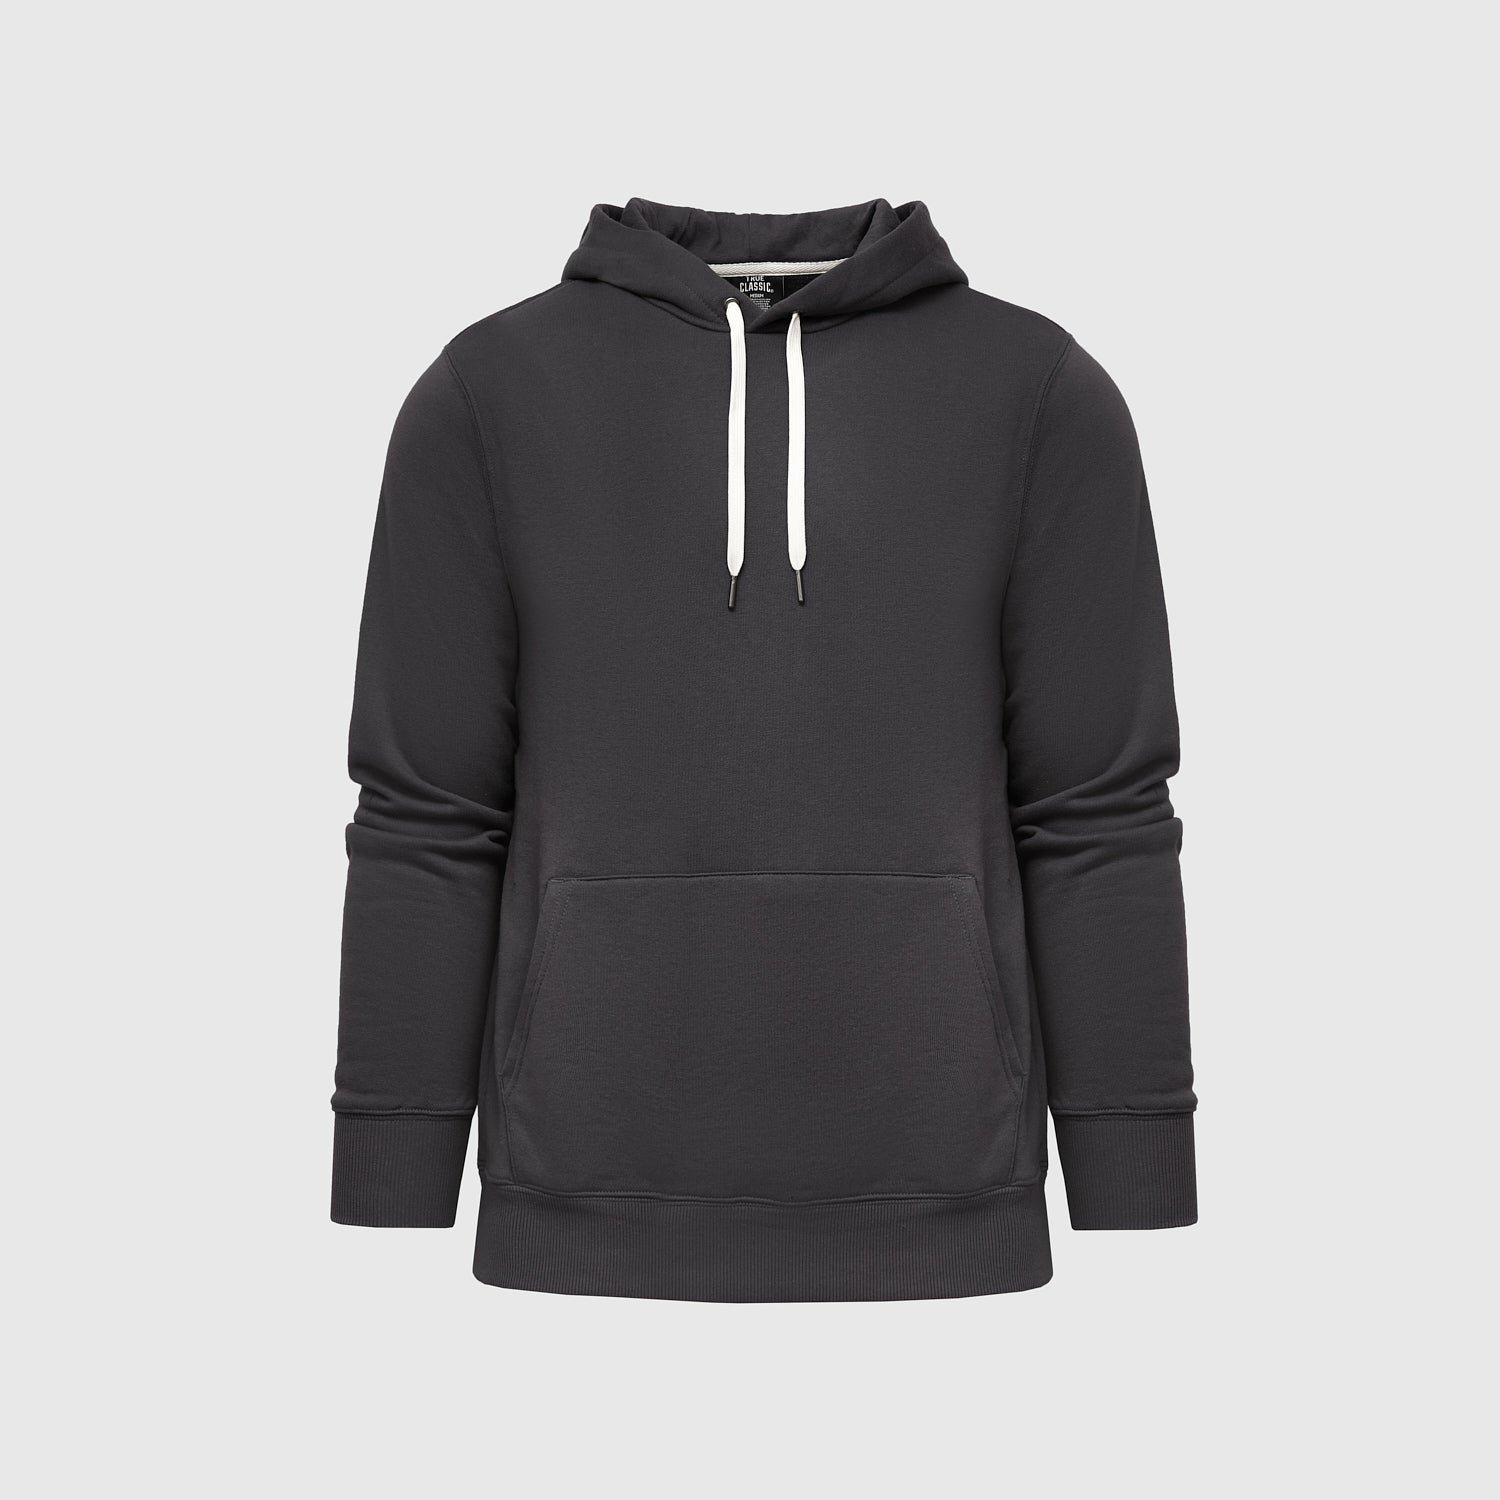 Carbon Fleece French Terry Pullover Hoodie